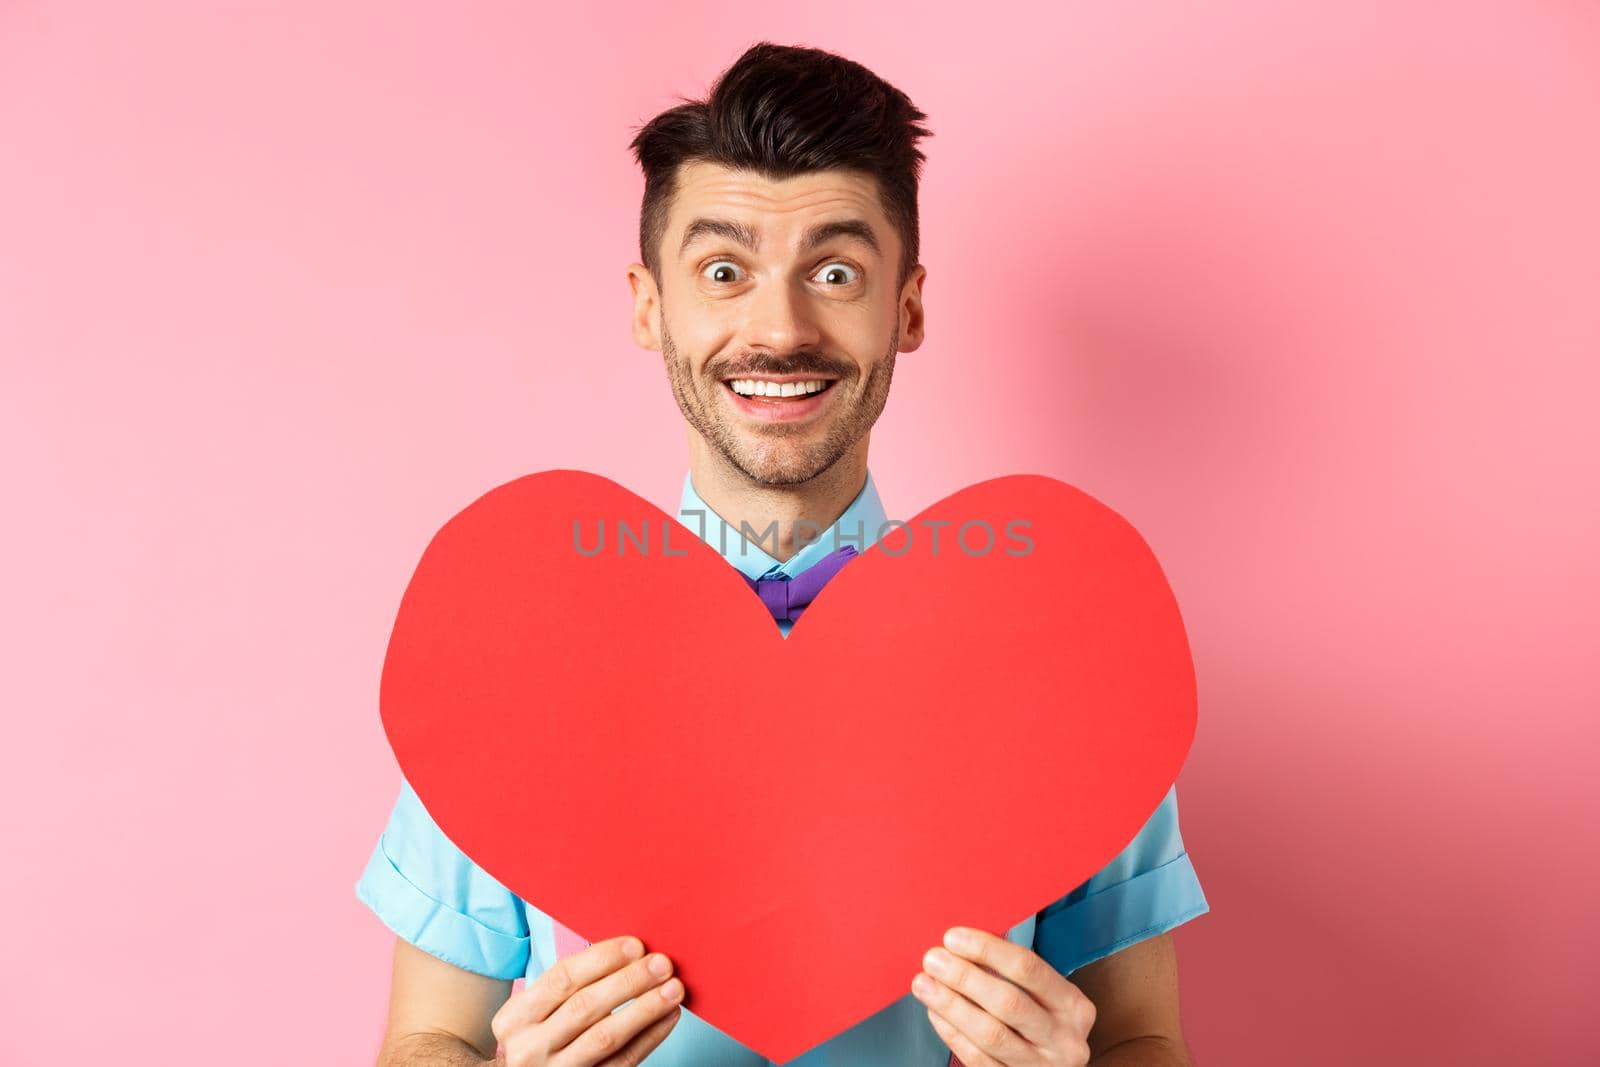 Hopeful man in love showing red heart sign, smiling at camera, waiting for soulmate on Valentines day, standing on pink background by Benzoix